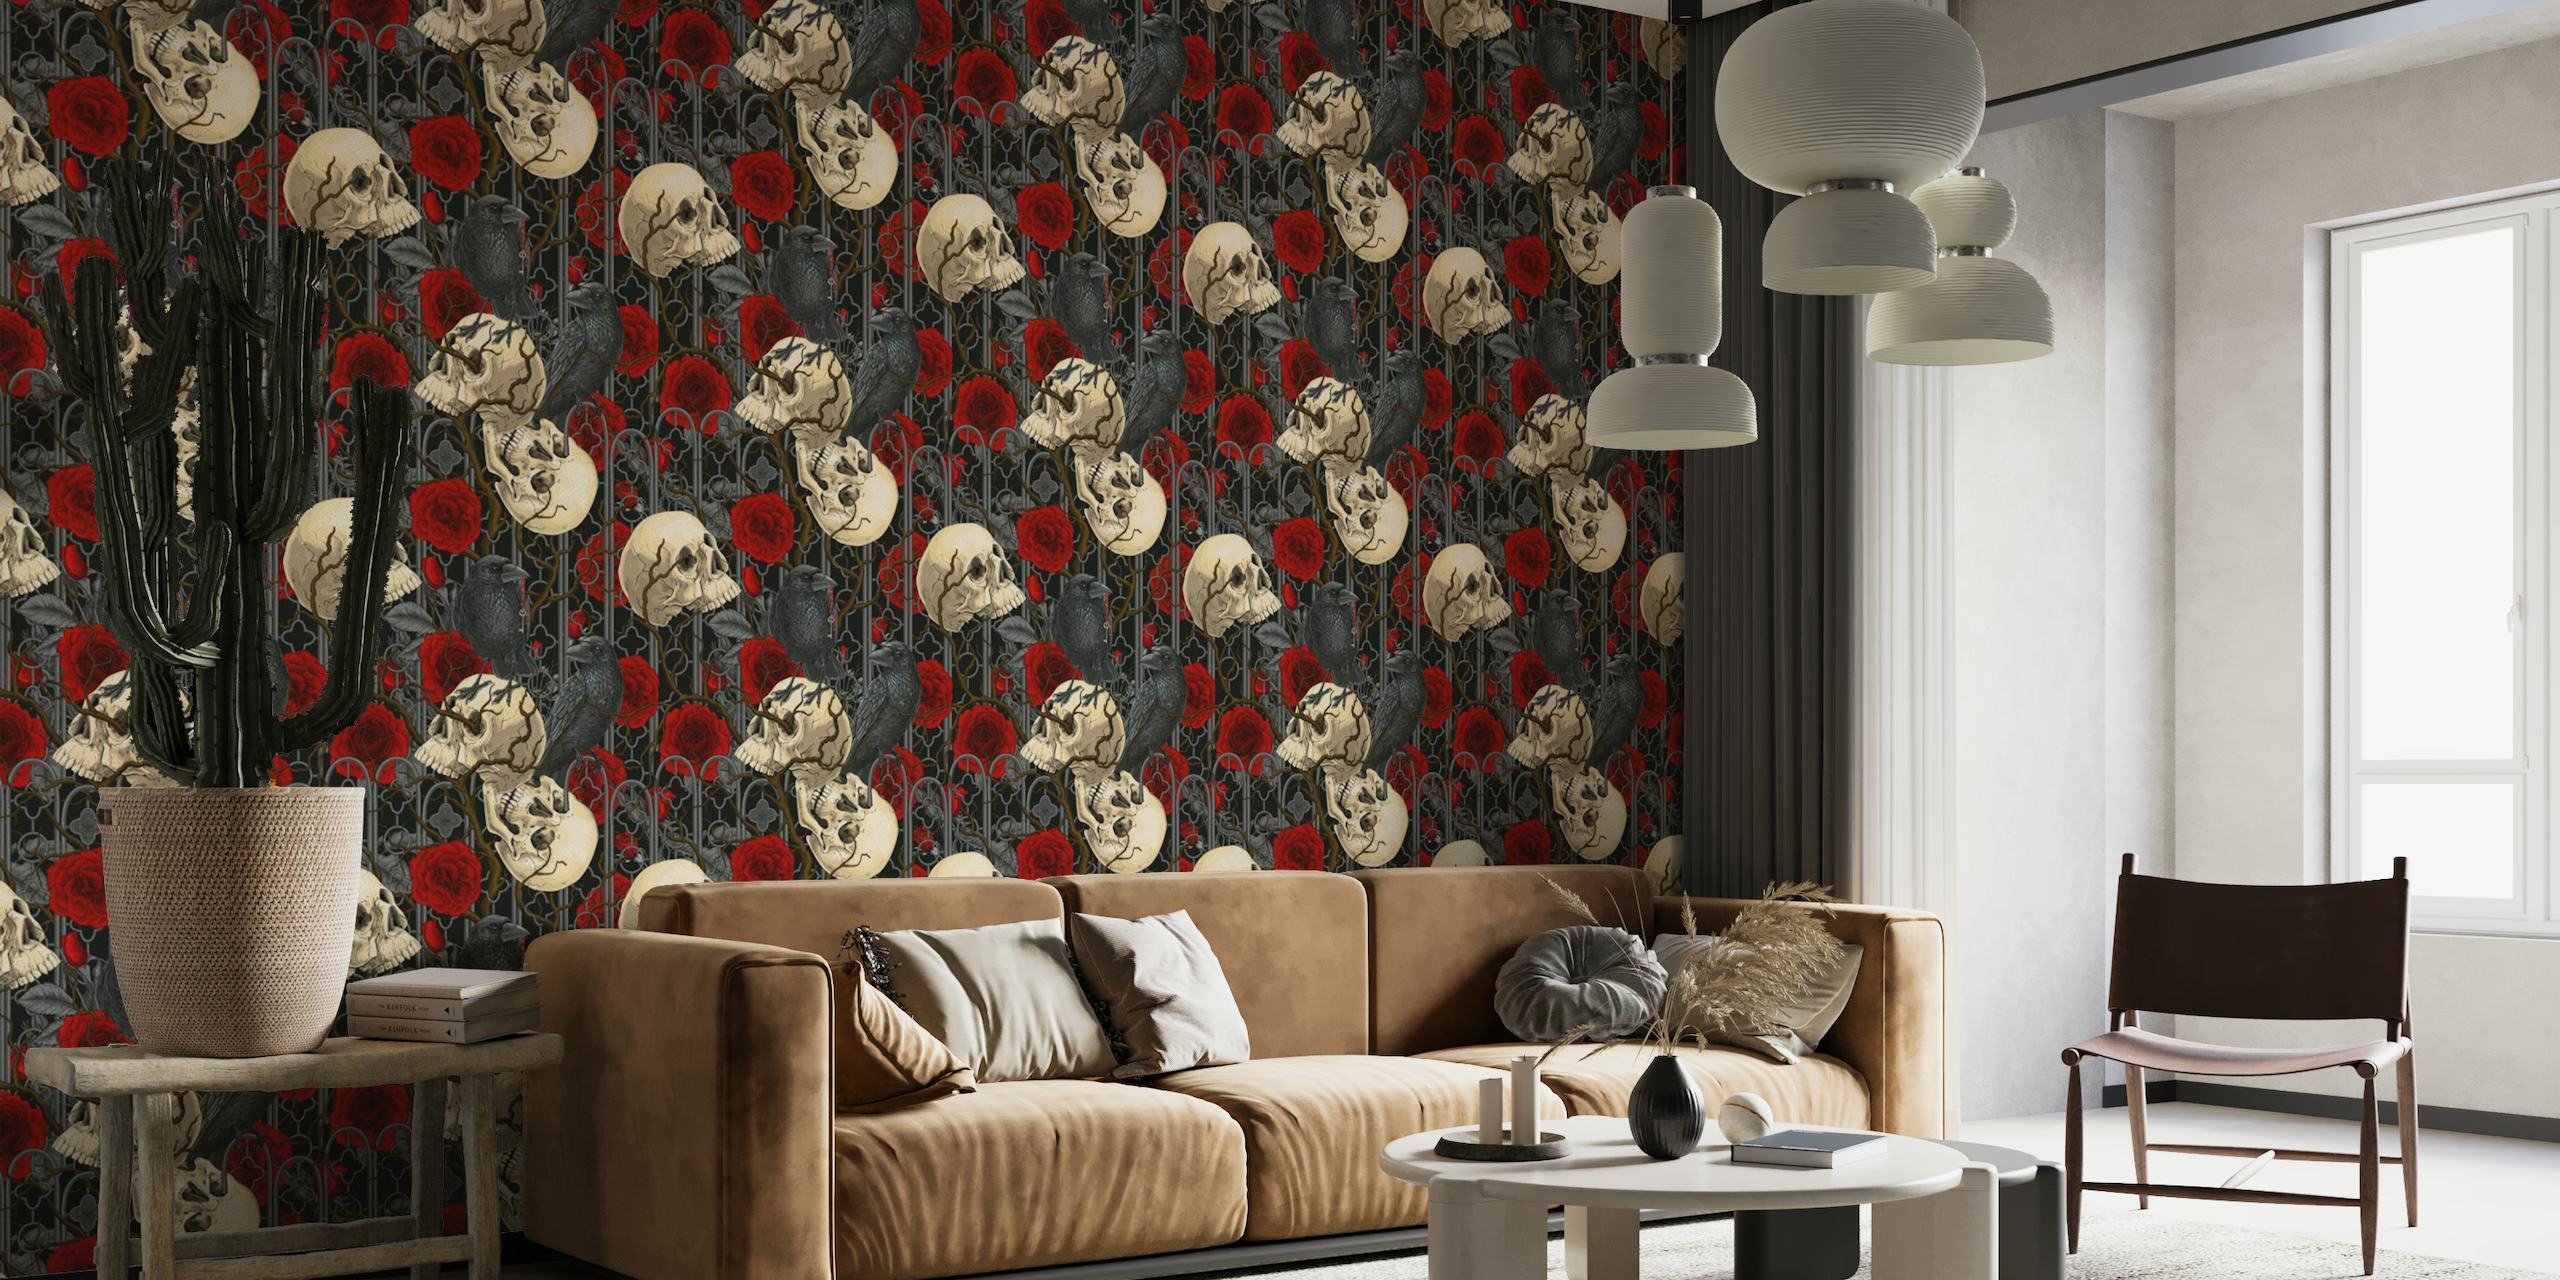 Raven's secret. Dark and moody gothic illustration with human skulls and red roses wallpaper